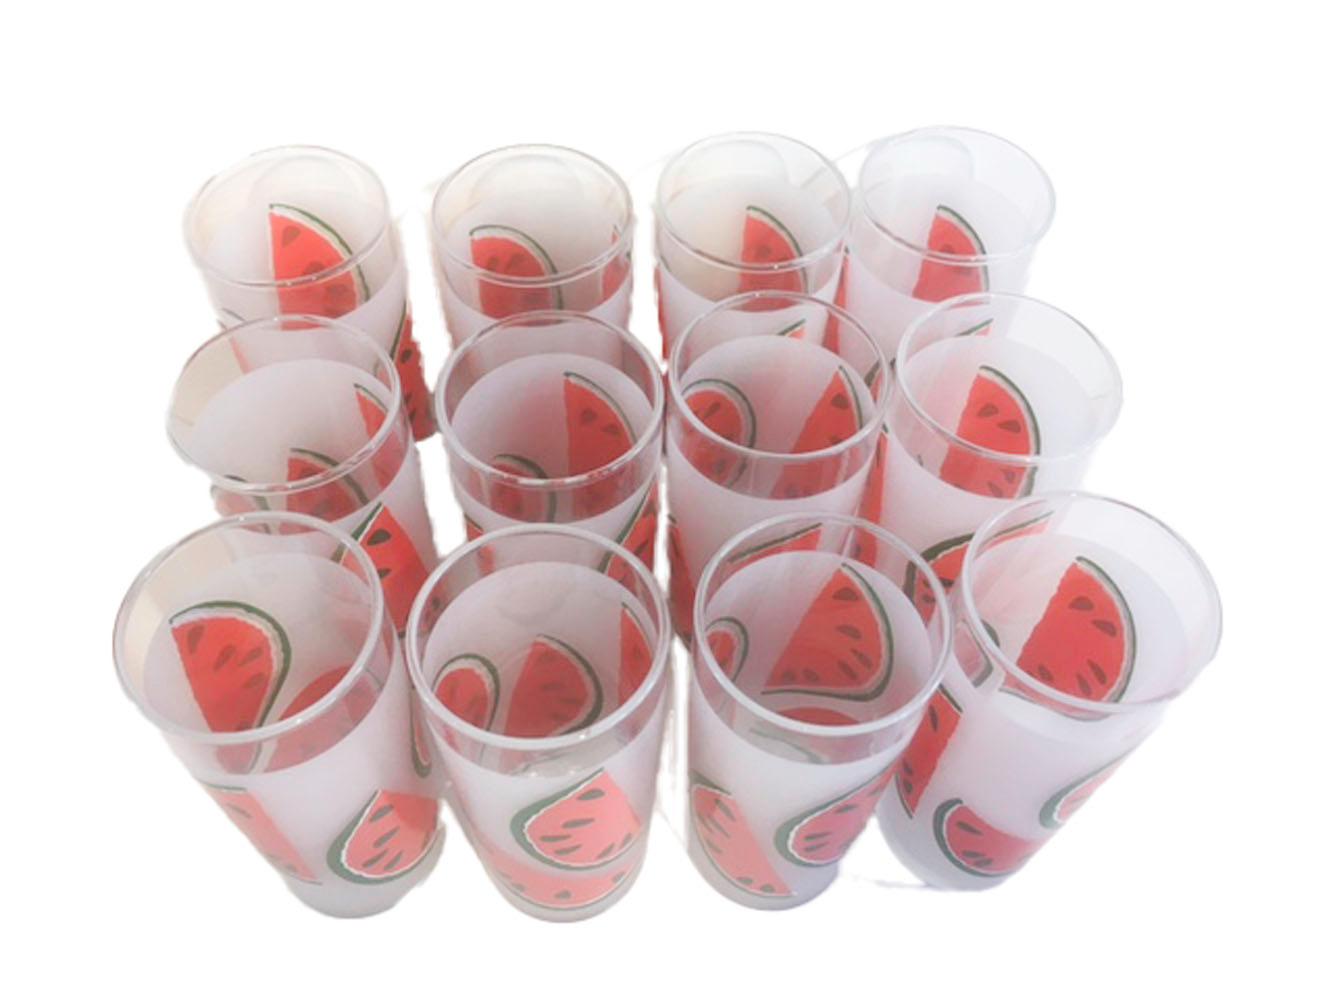 Rare set of 12, Libbey Glass Co., Frosted Tom Collins glasses with watermelon slices in enamel colors. All in excellent condition.